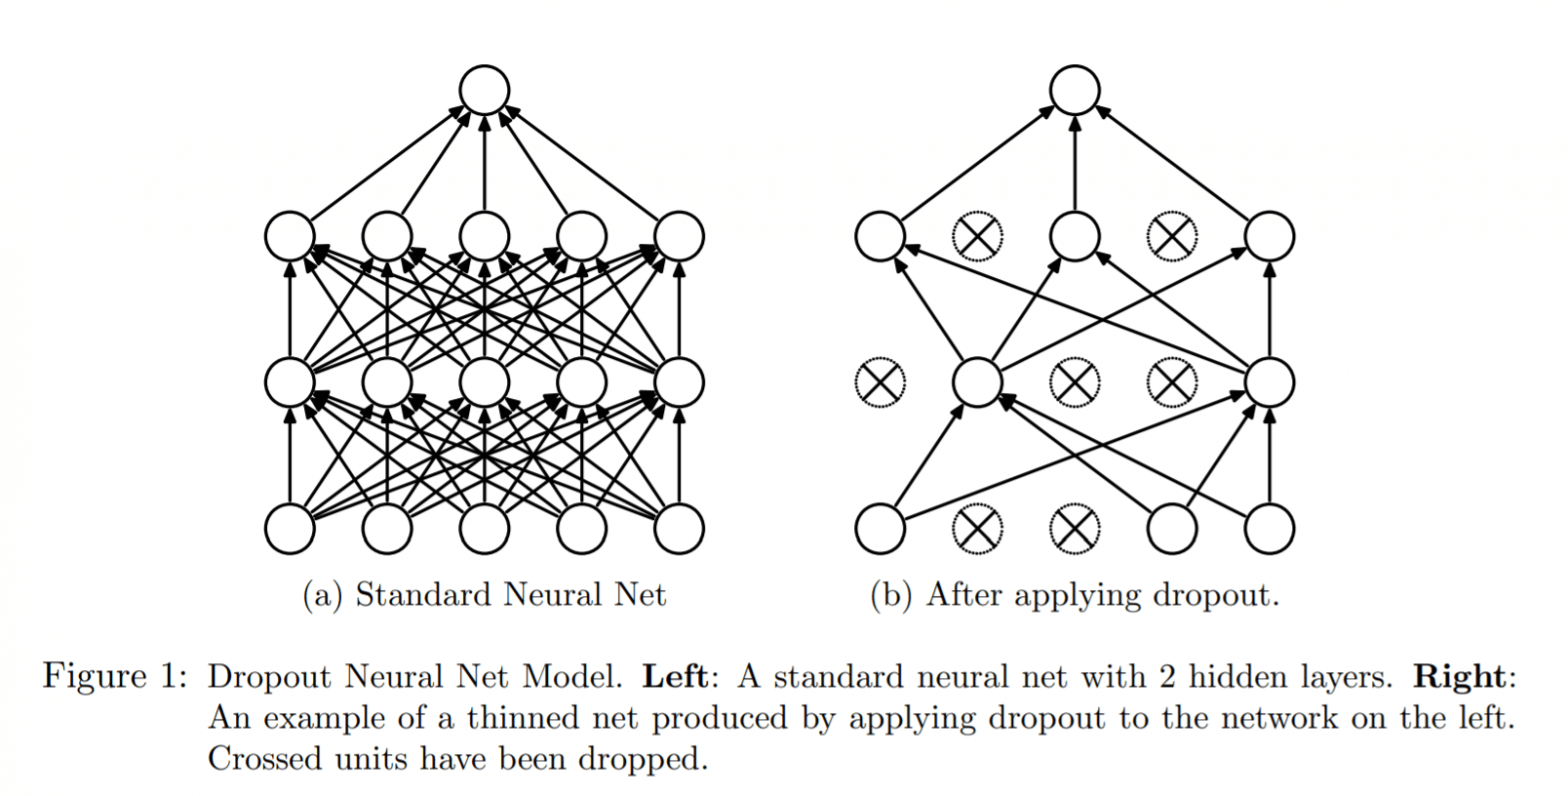 Dropout Neural Net Model. Credit http://jmlr.org/papers/v15/srivastava14a.html